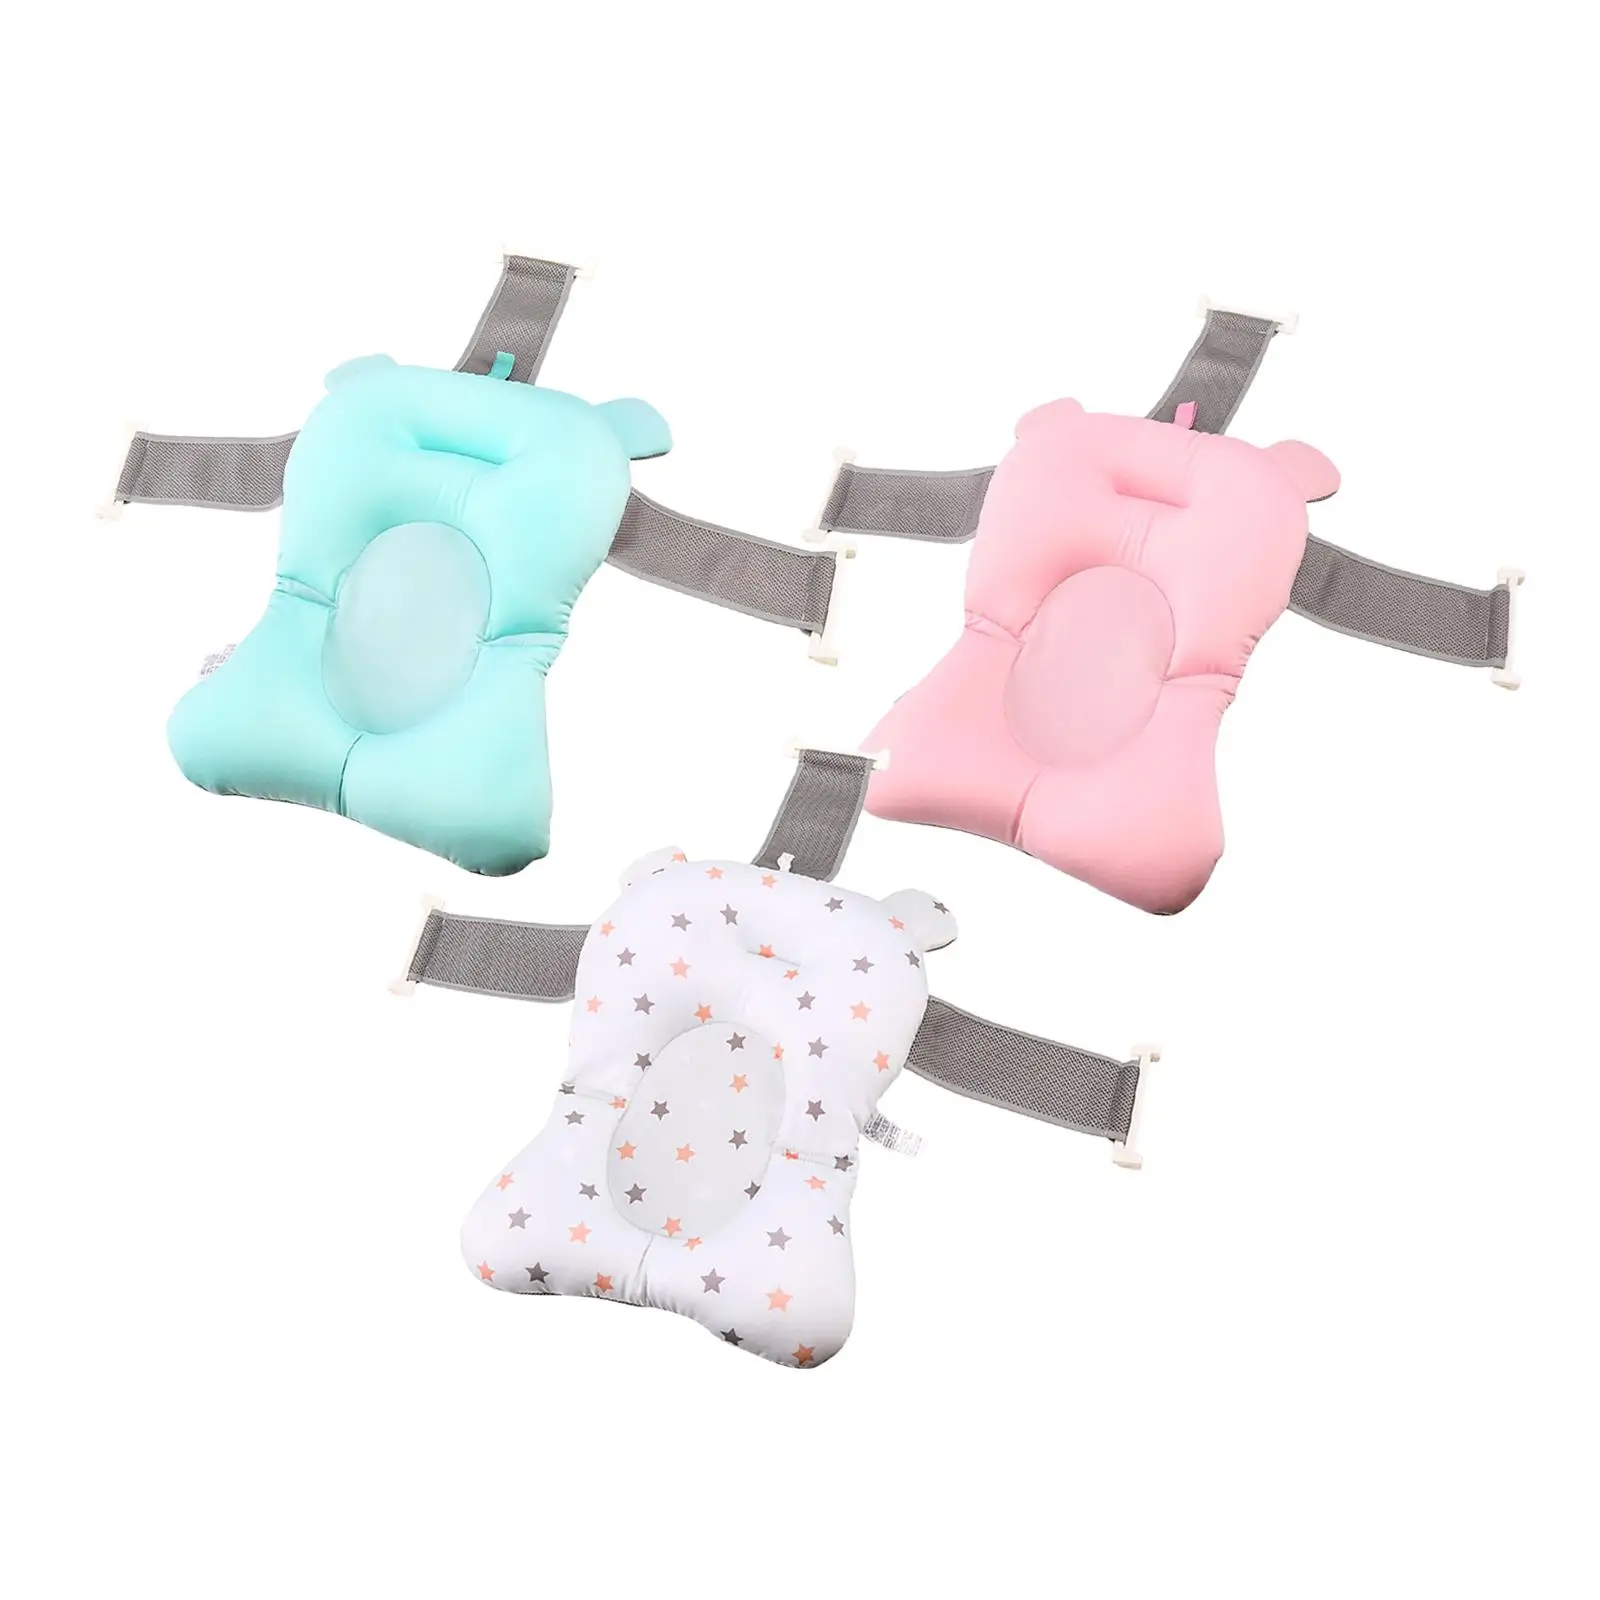 Infant Bathtub Support Cushion Net 20x14.2x3.5inch Dries Quickly Stable Breathable Trilateral Design Foldable Durable Soft Light